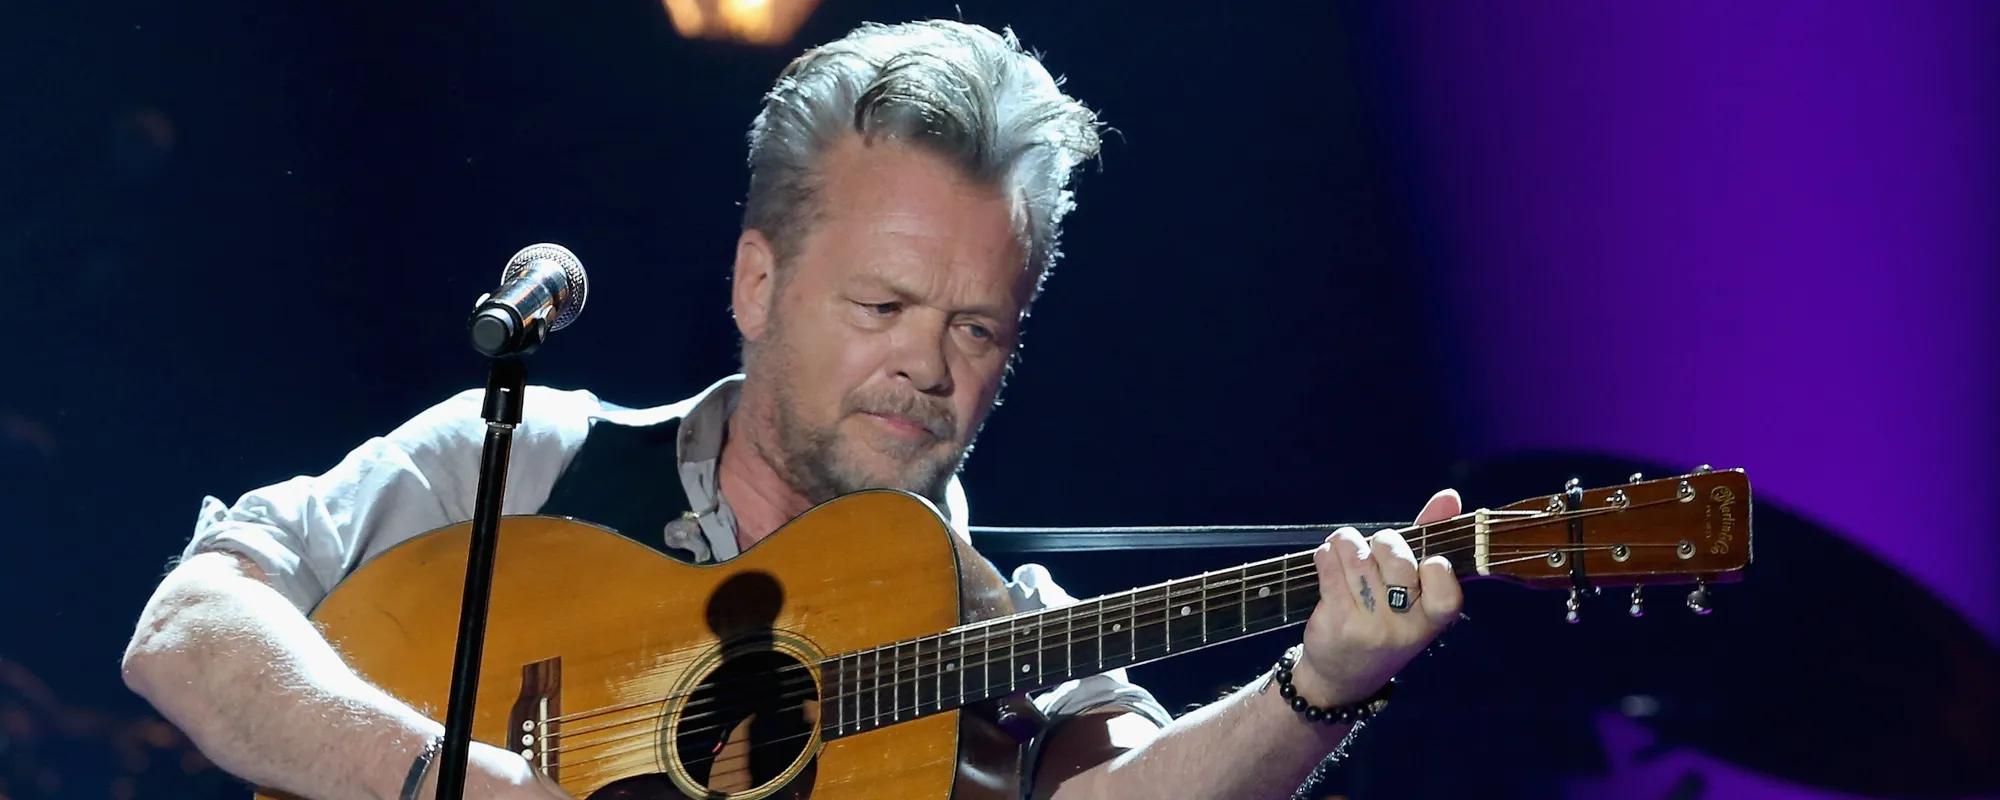 “Nobody’s the Boss of Me”: The Story Behind “Paper in Fire” by John Cougar Mellencamp and the Fiery Kin Who Inspired It